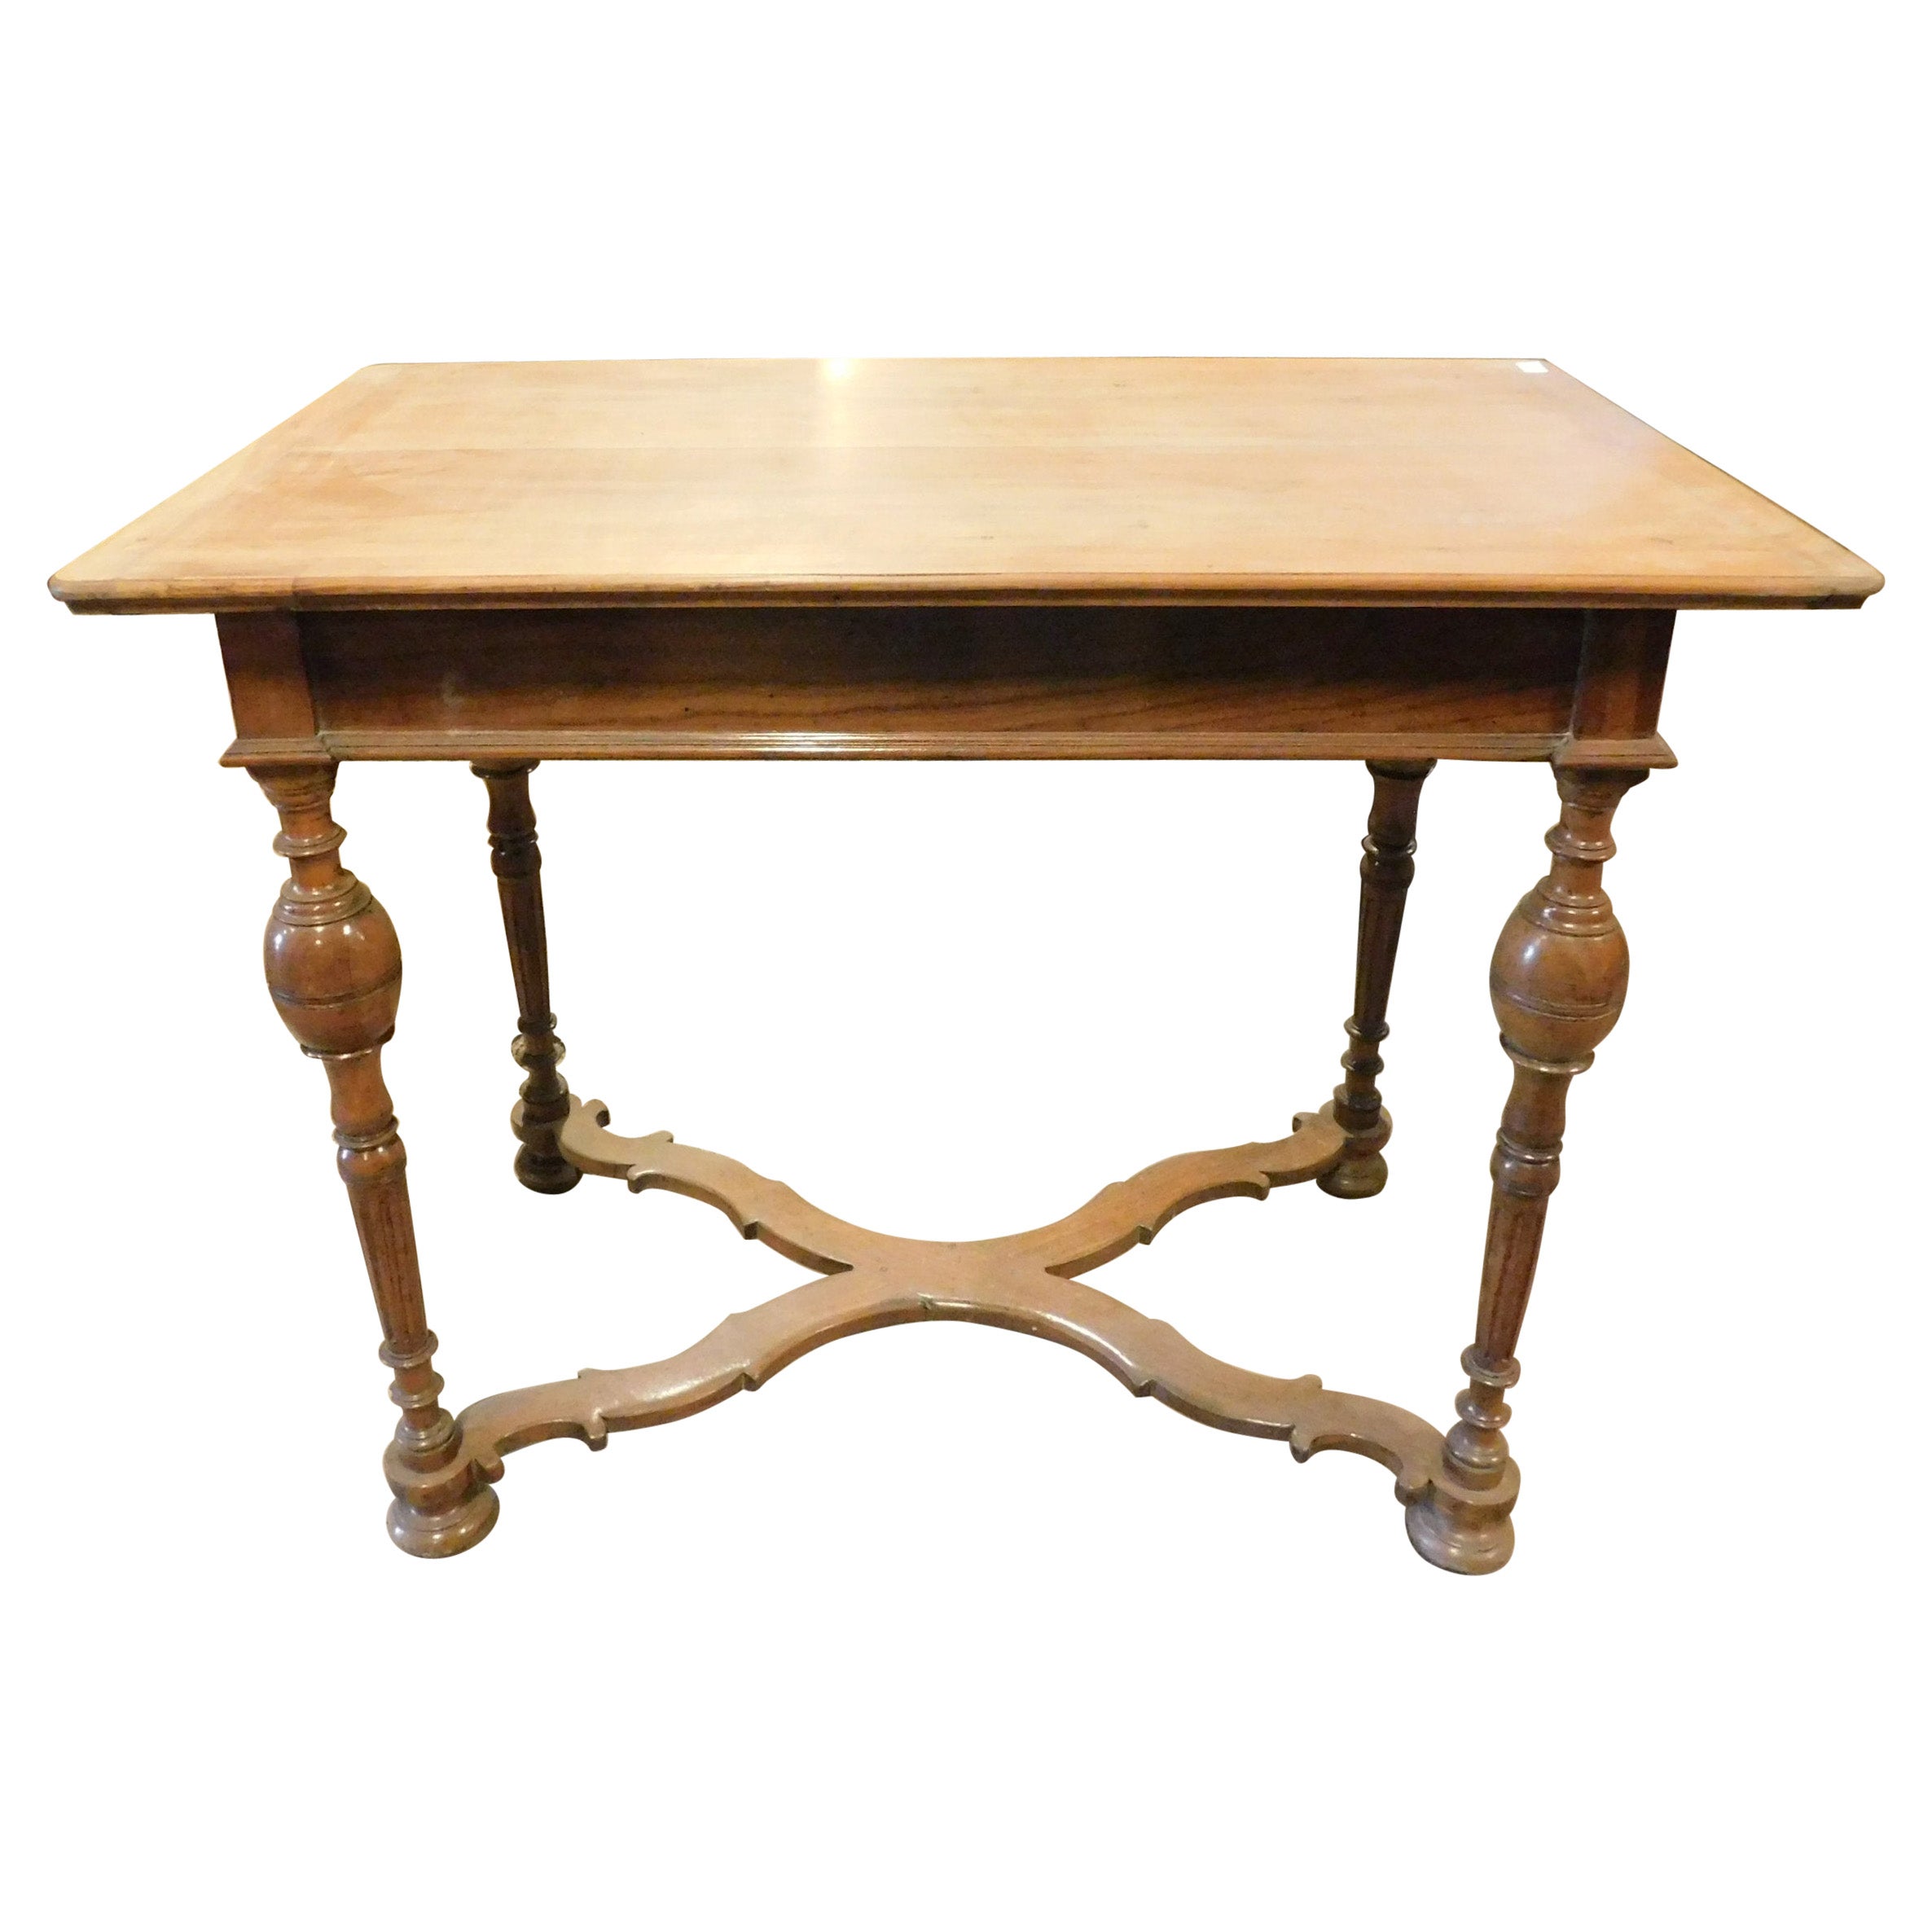 Antique Cherry Wood Table with Hand Carved Legs, 18th Century, Italy For Sale